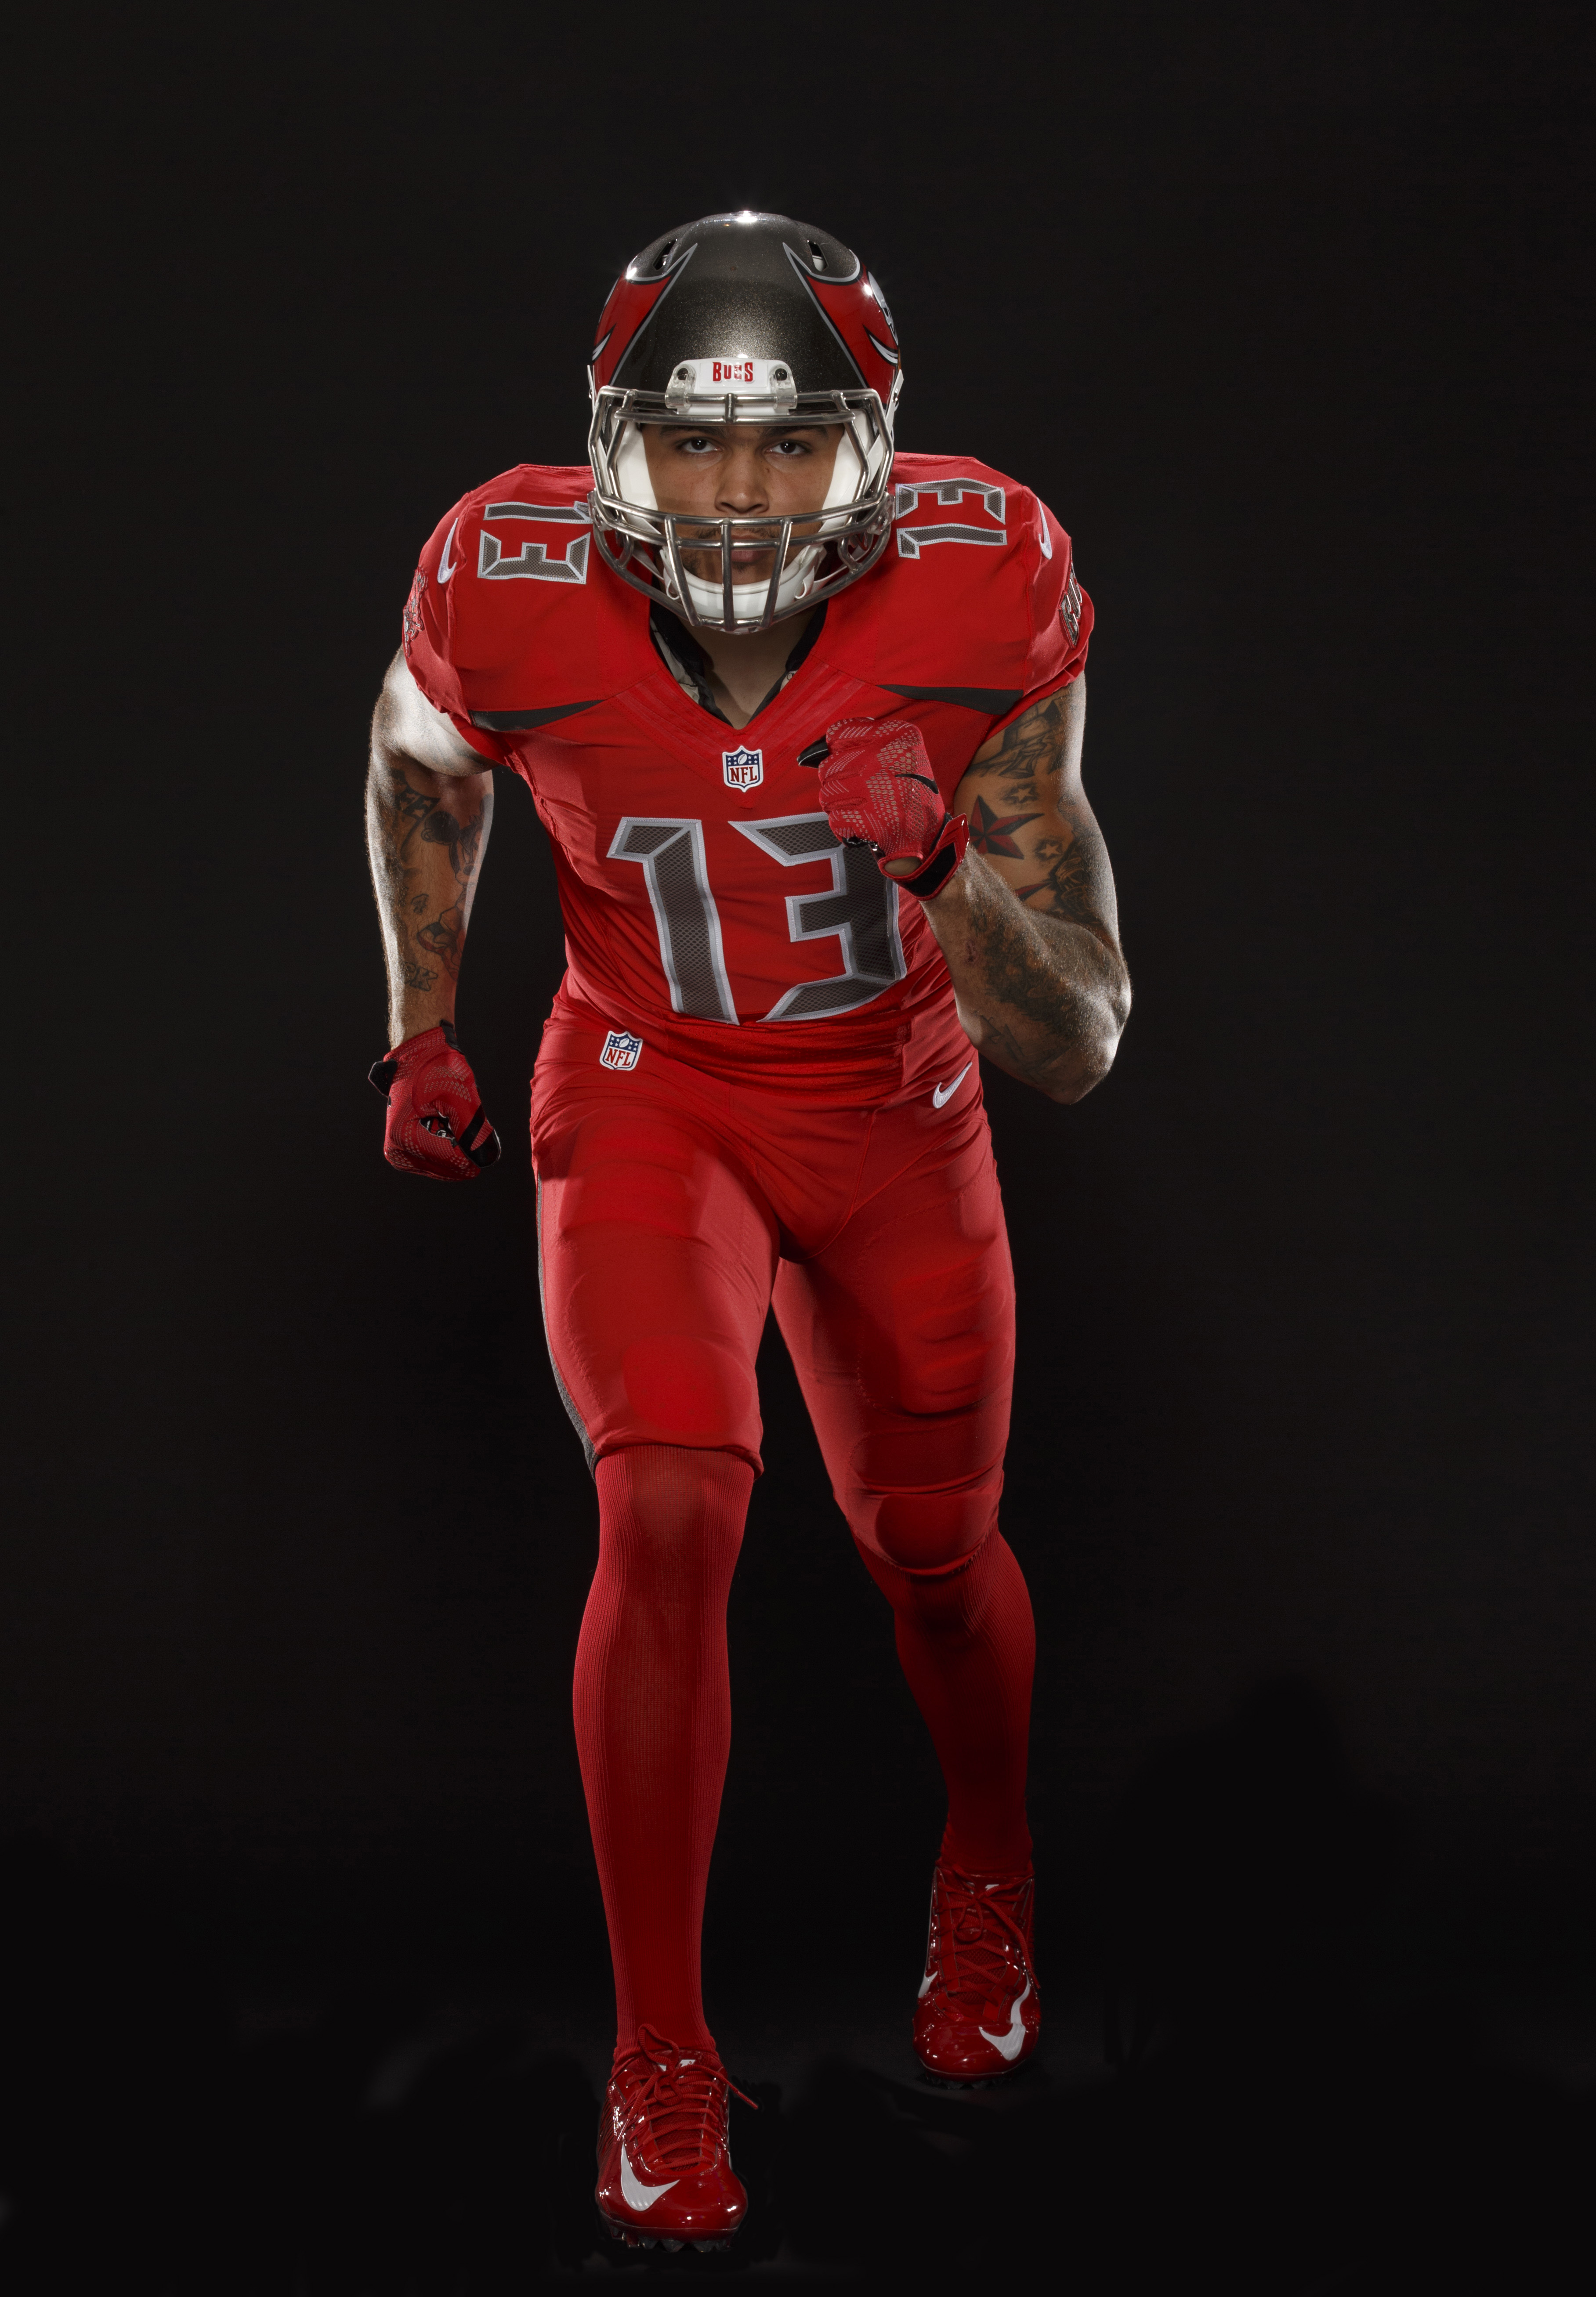 mike evans color rush jersey